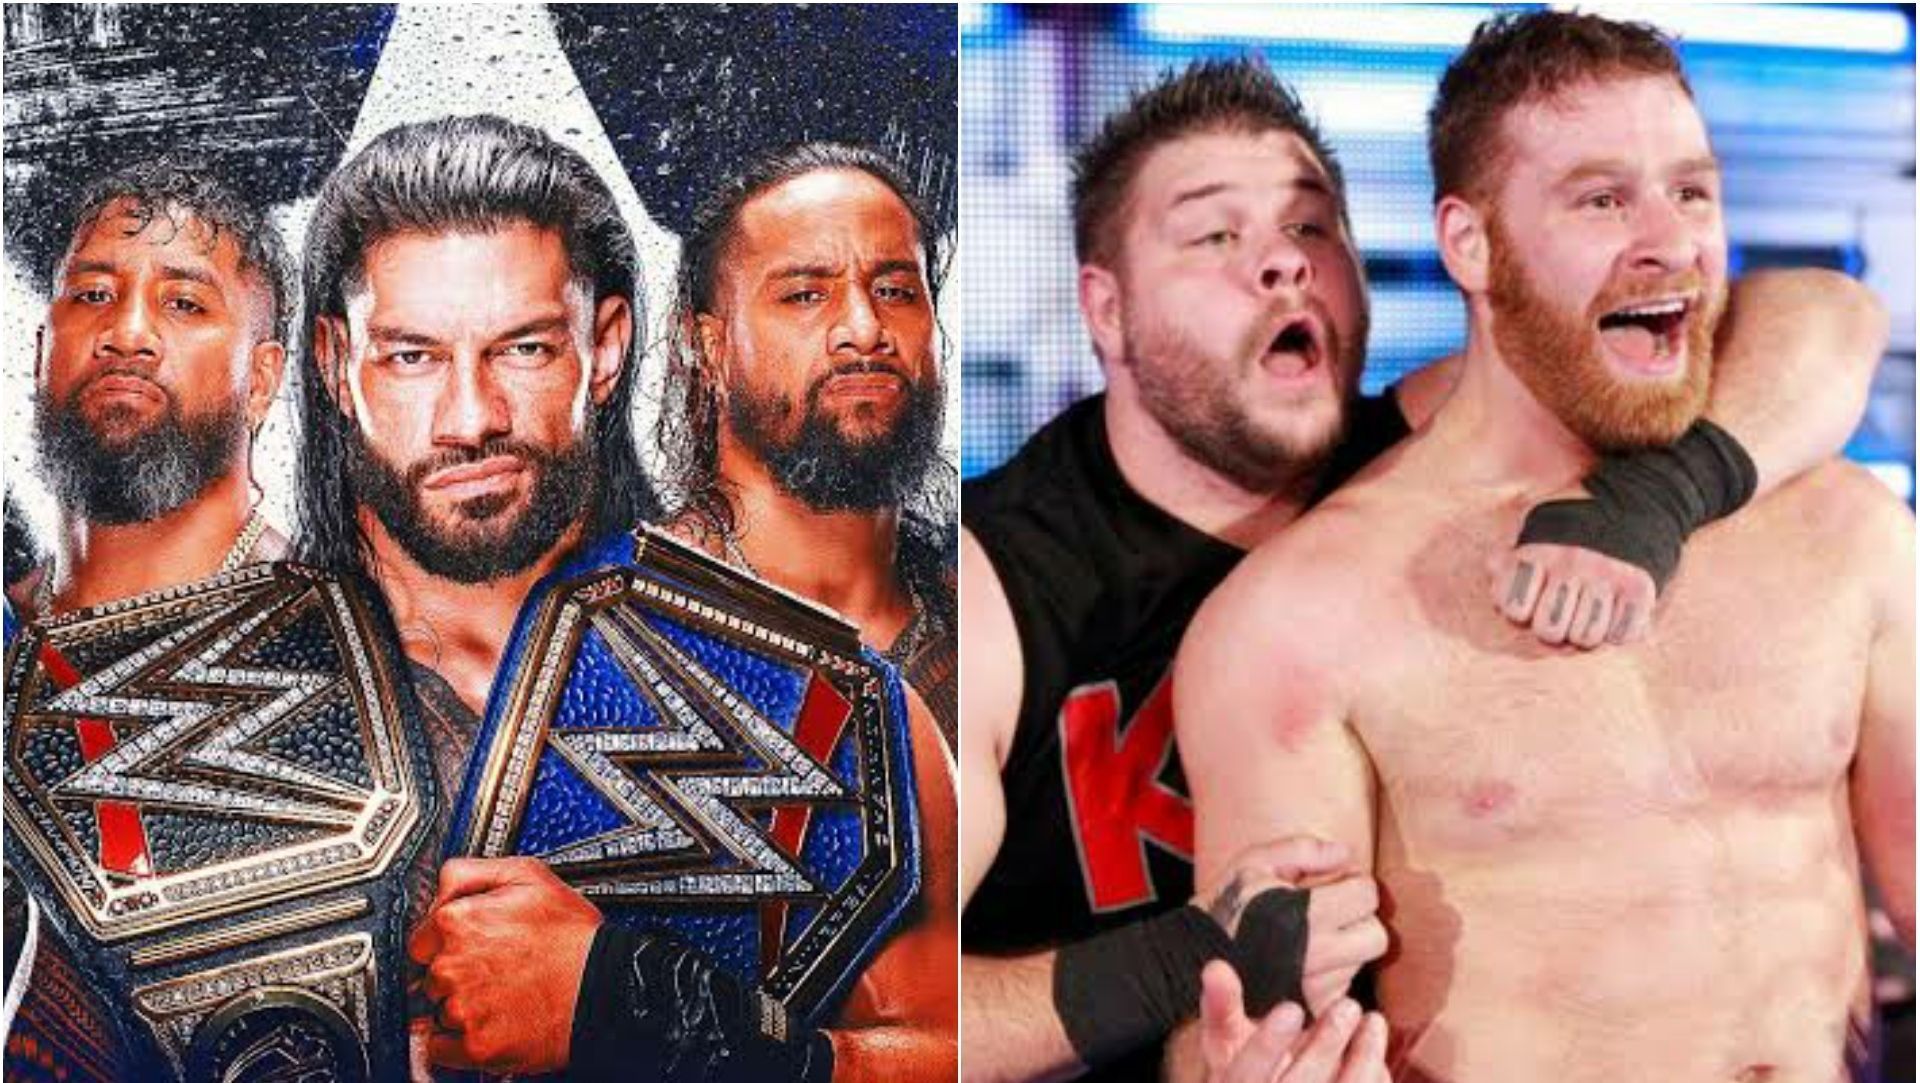 Kevin Owens could reunite with Sami Zayn on WWE SmackDown.